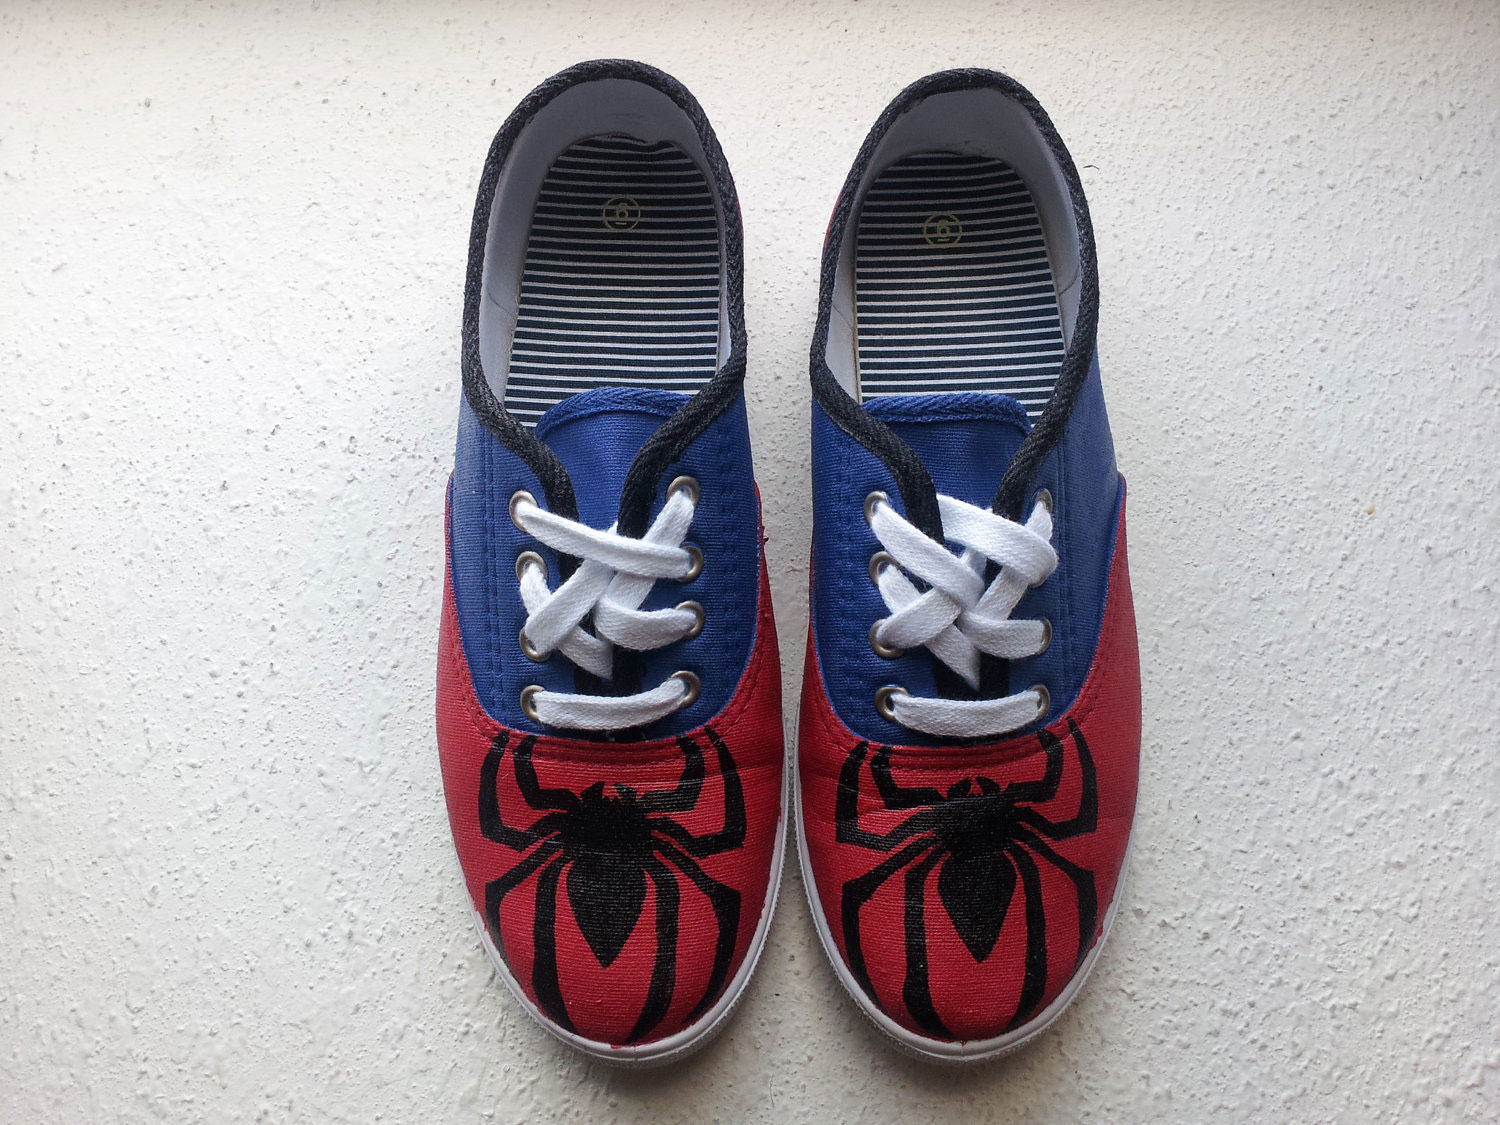 Spider-Man-Hand-Painted-Shoes